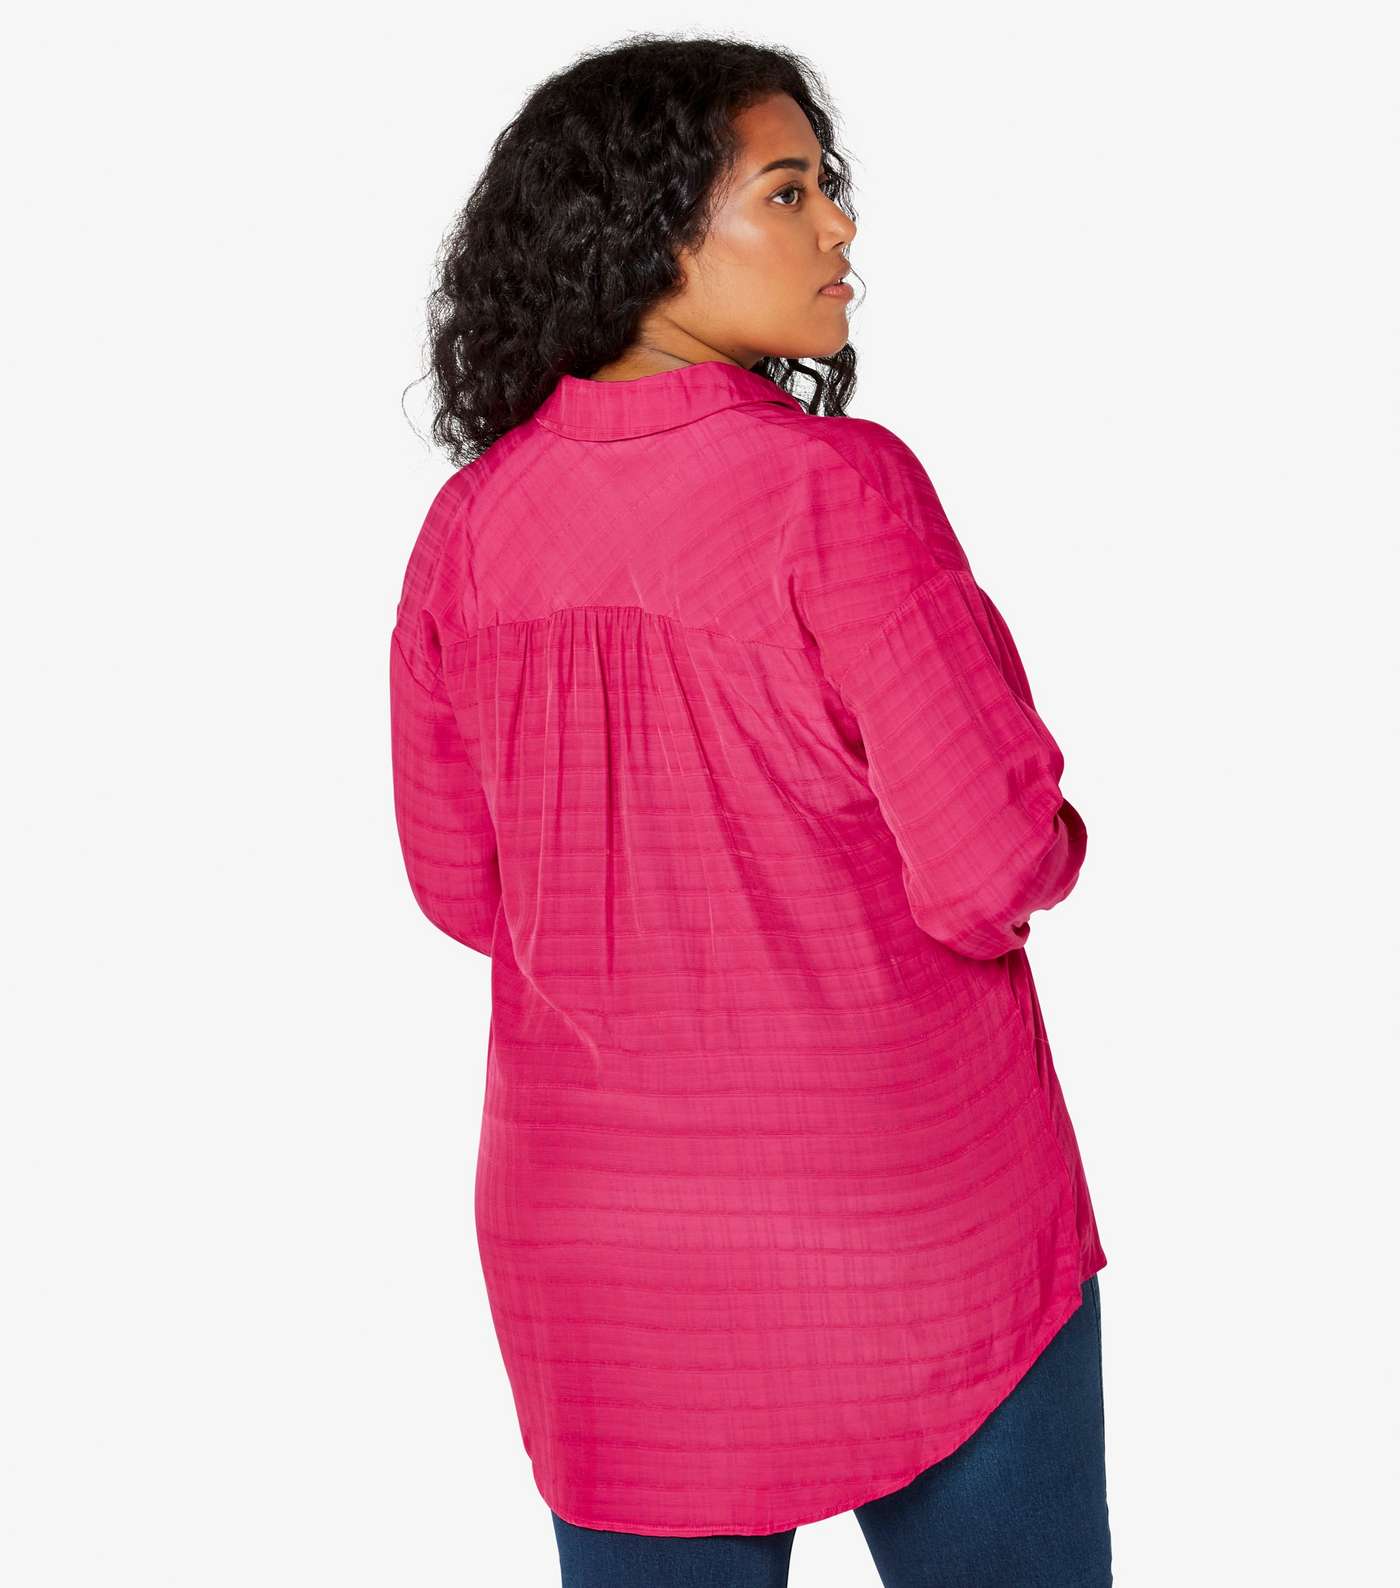 Apricot Curves Bright Pink Check Oversized Shirt Image 3